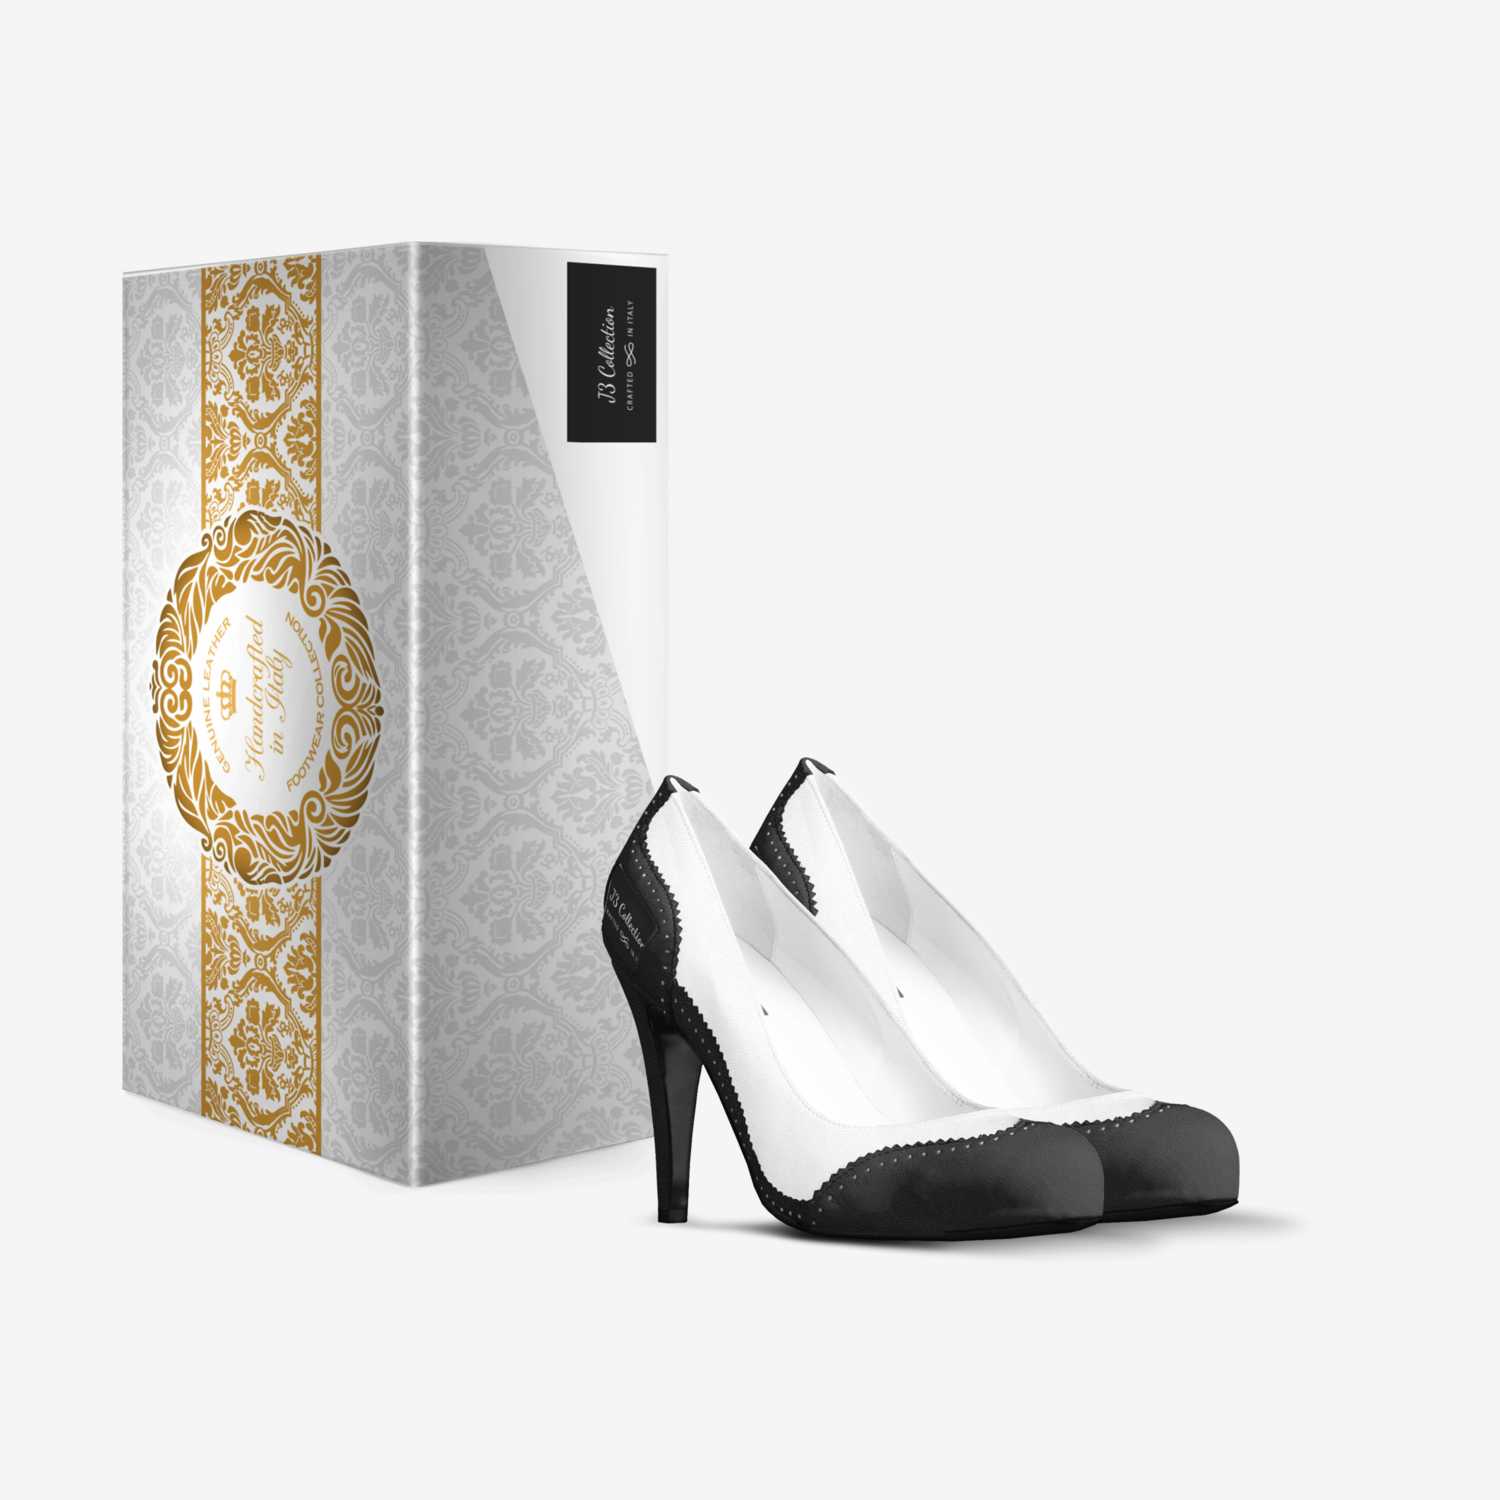 J3 Collection custom made in Italy shoes by Stephanie Jordan | Box view